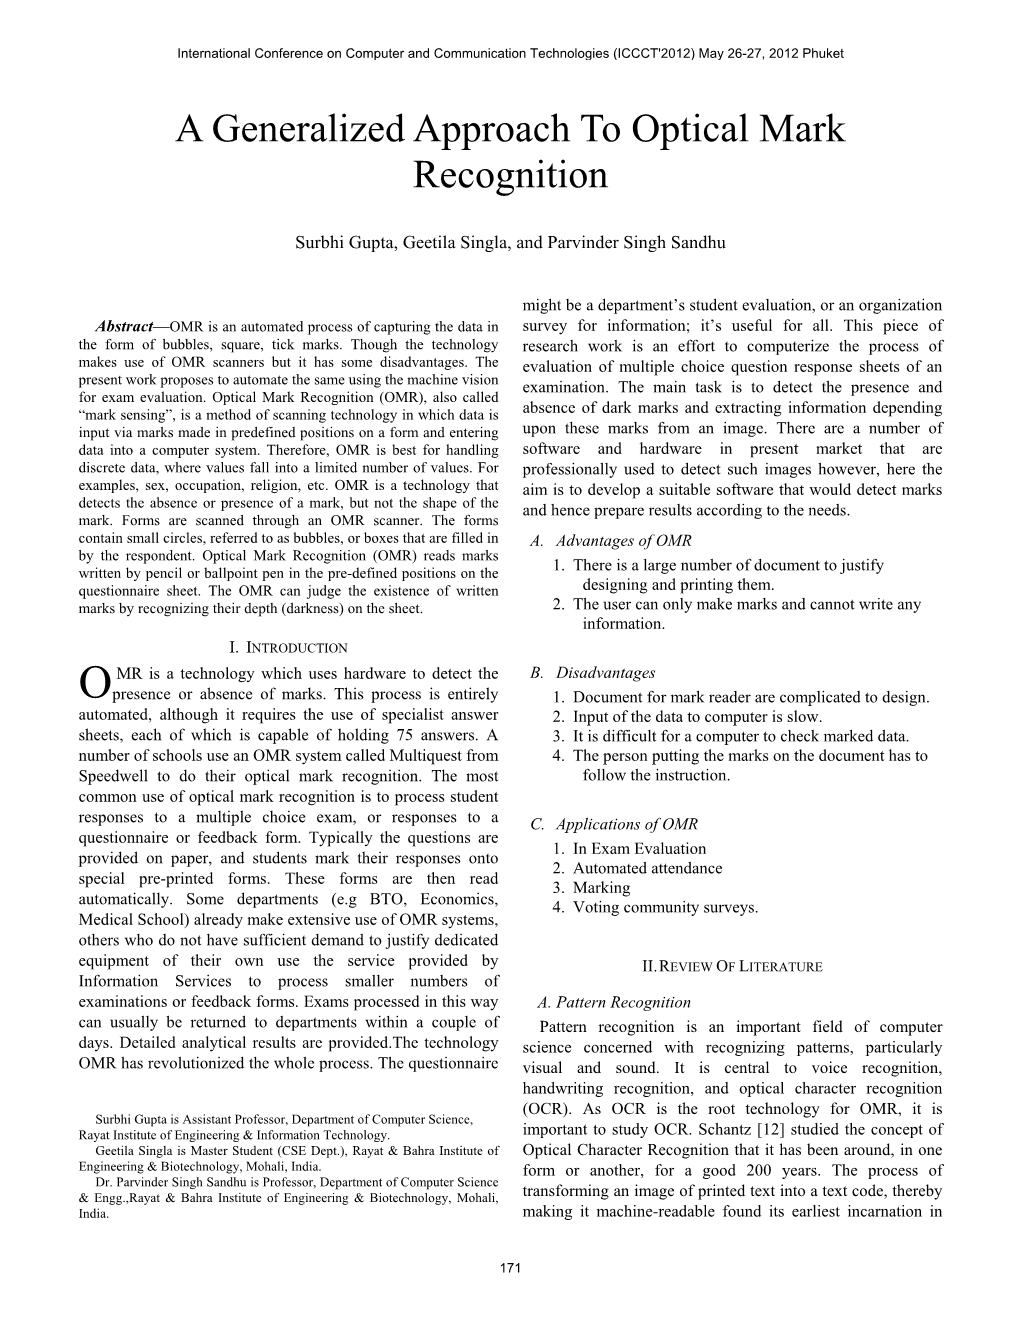 A Generalized Approach to Optical Mark Recognition